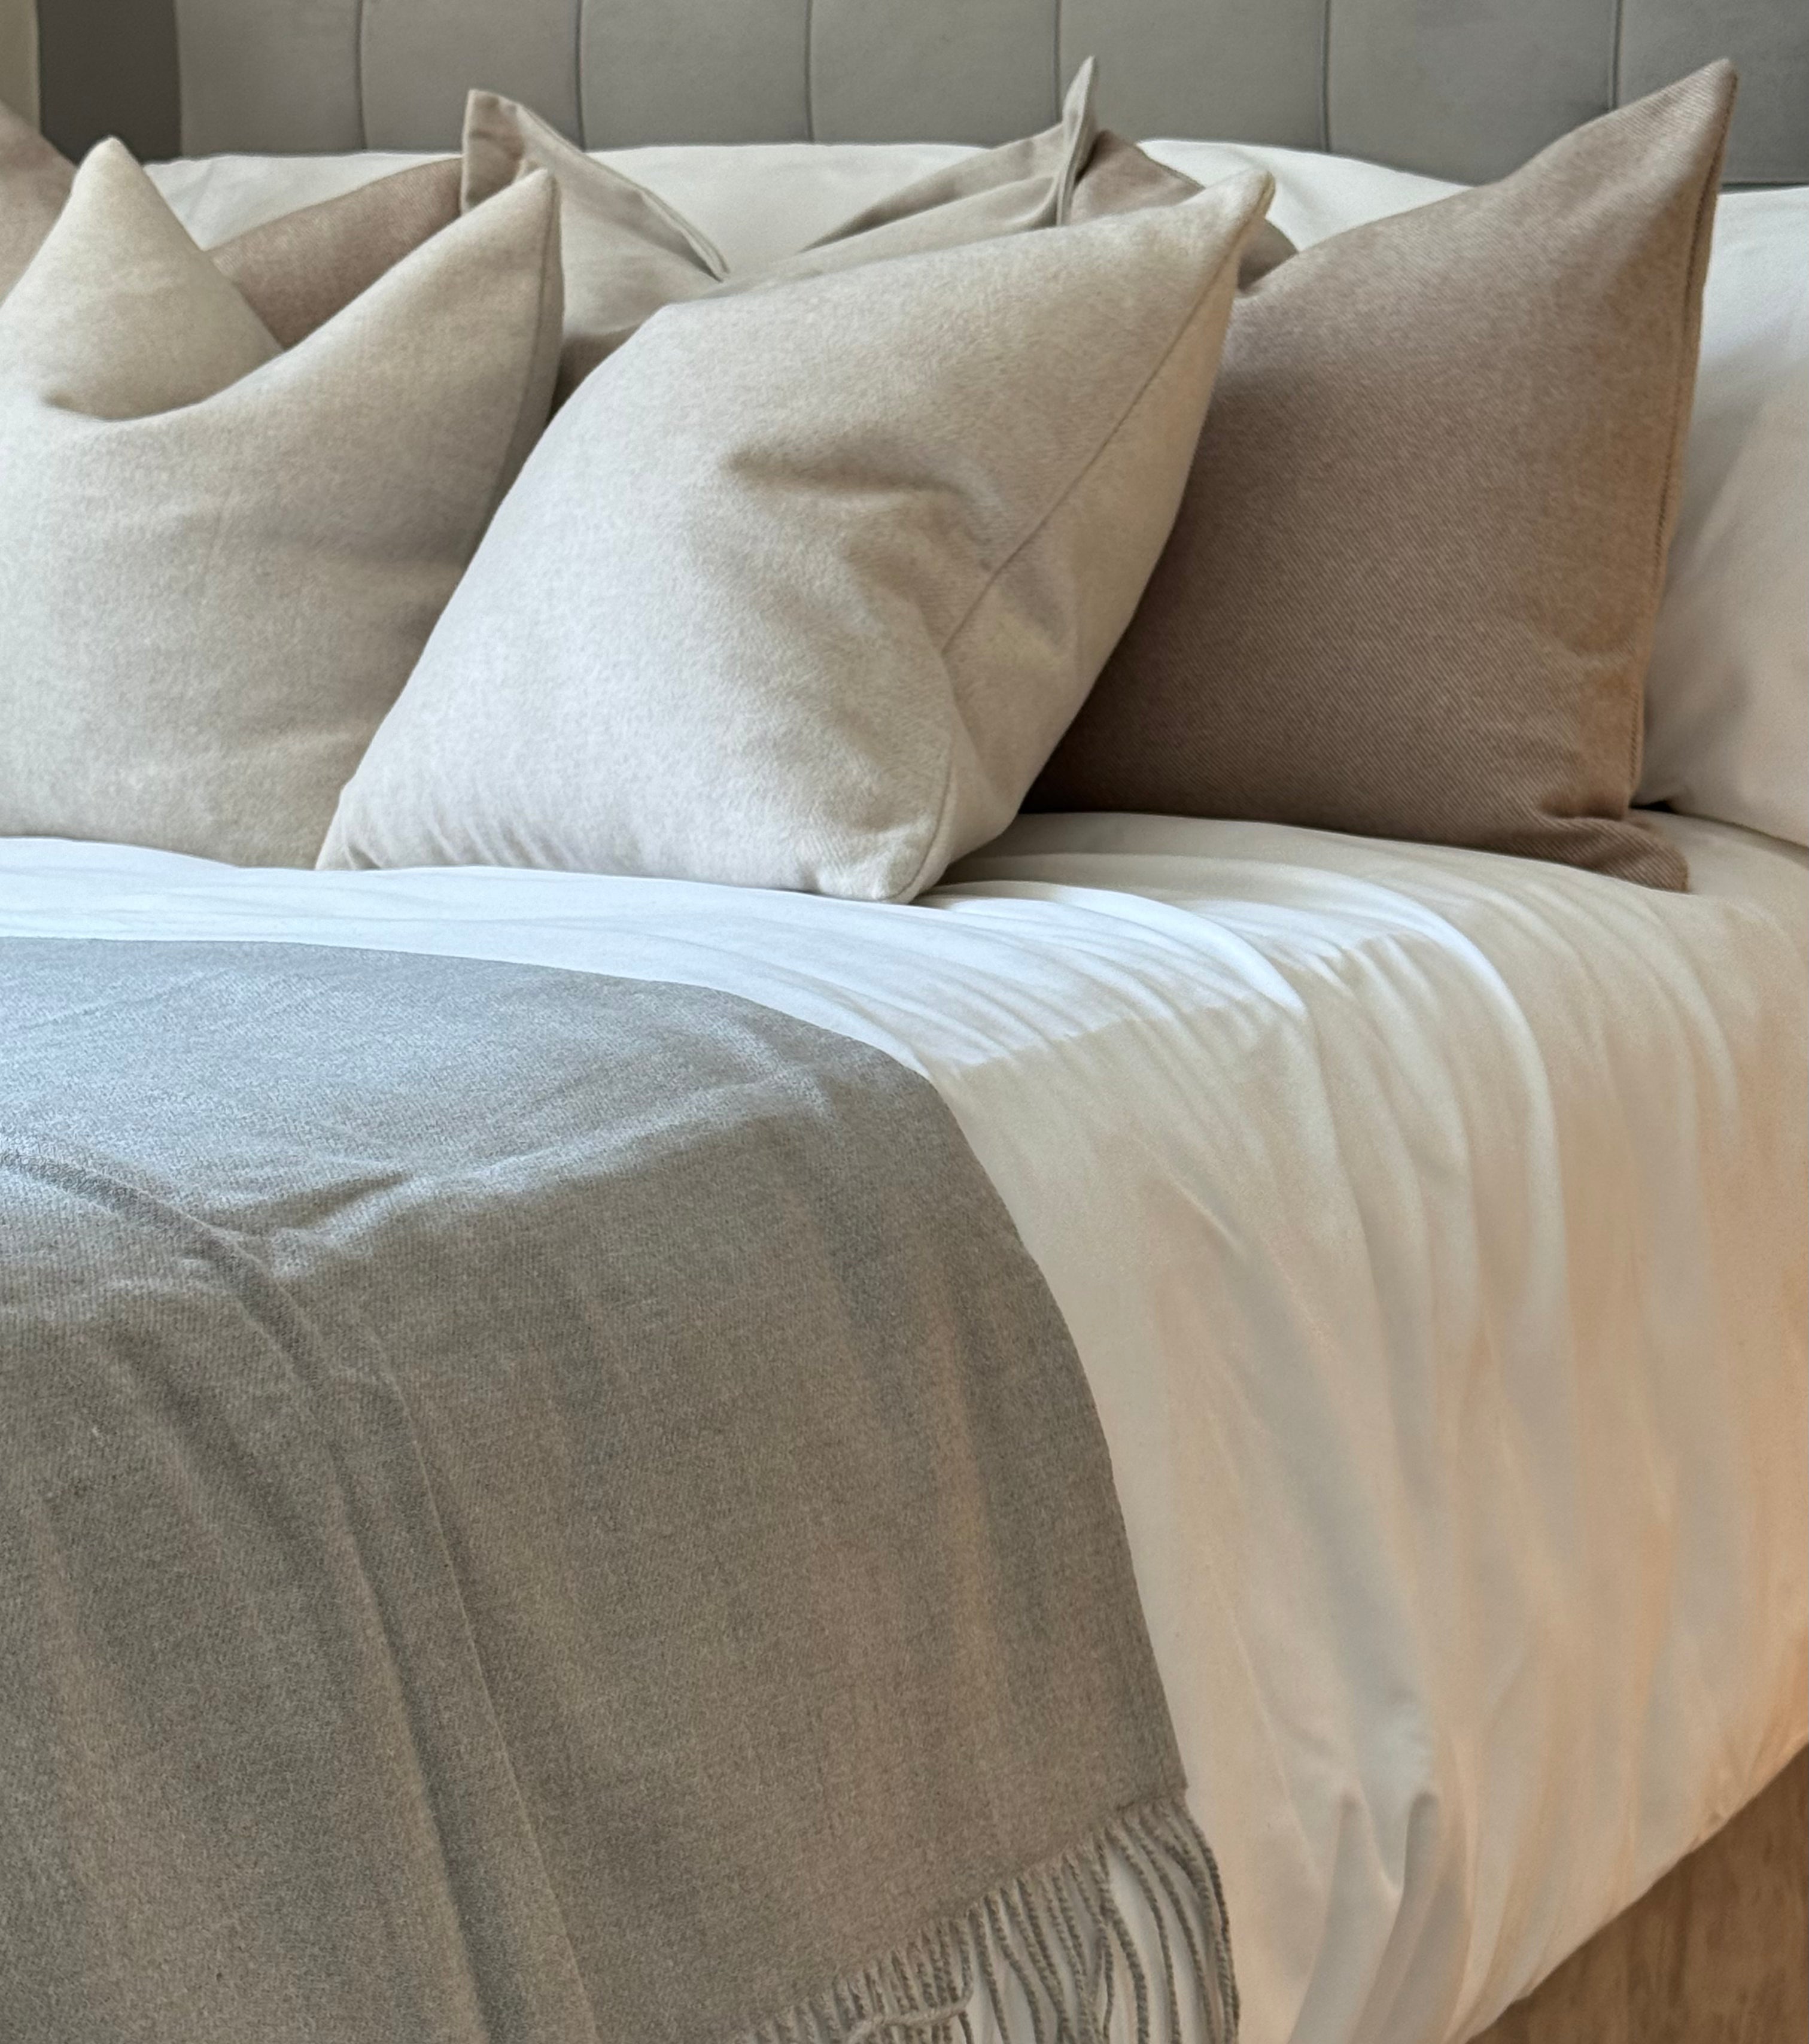 Bed styled with Mysa Homeware's neutral luxury cushions and bed runner, creating a neutral aesthetic, cosy bedroom ambiance.